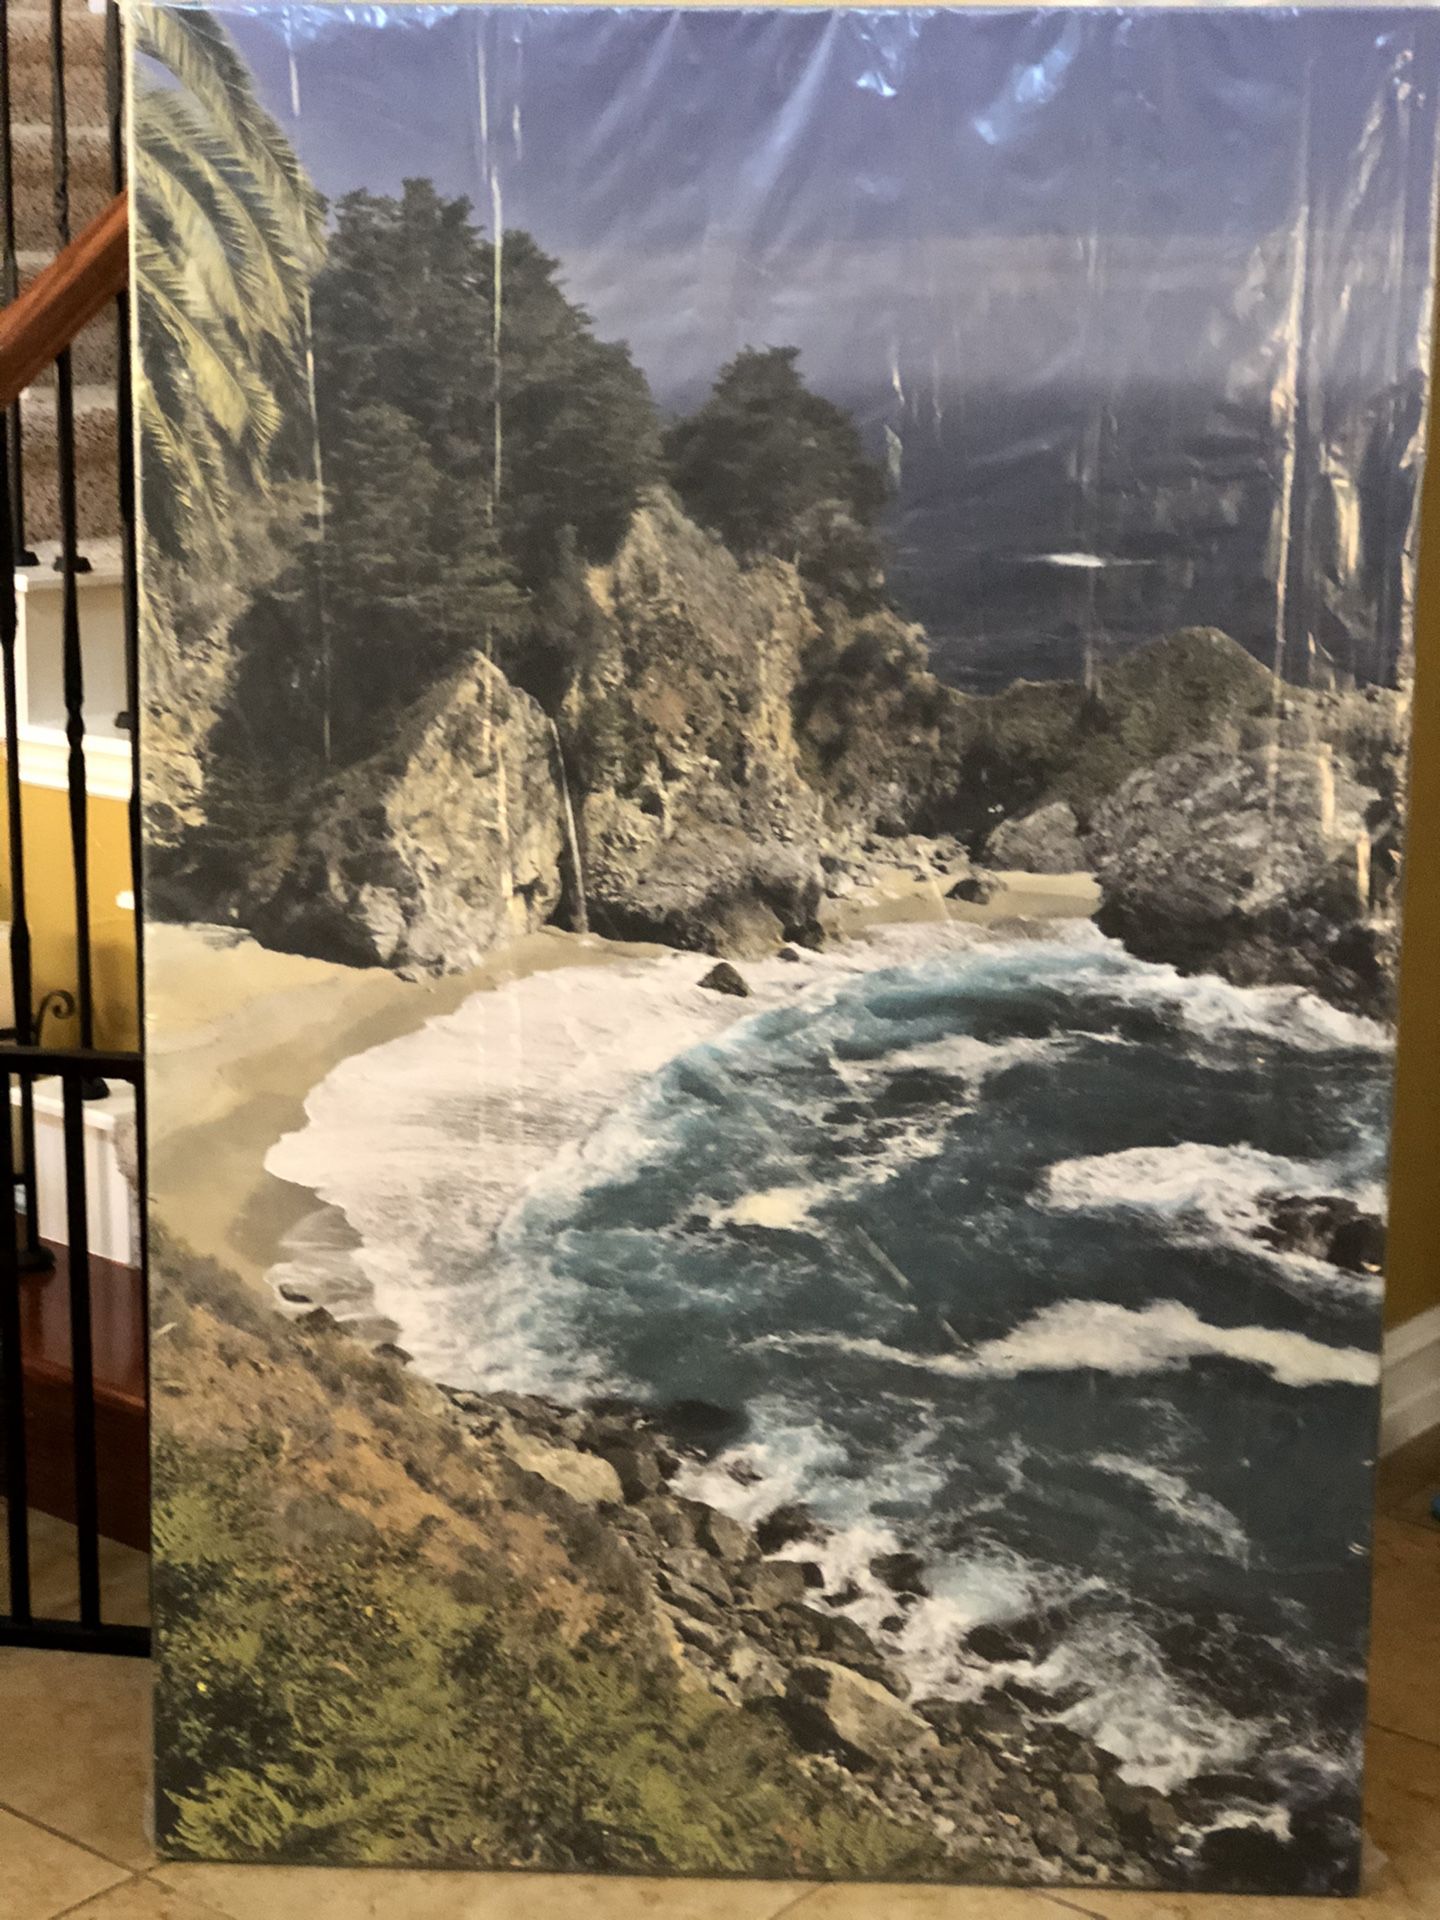 BIG SUR California- Original photography on canvas. 60”high x 40” wide. New in plastic.